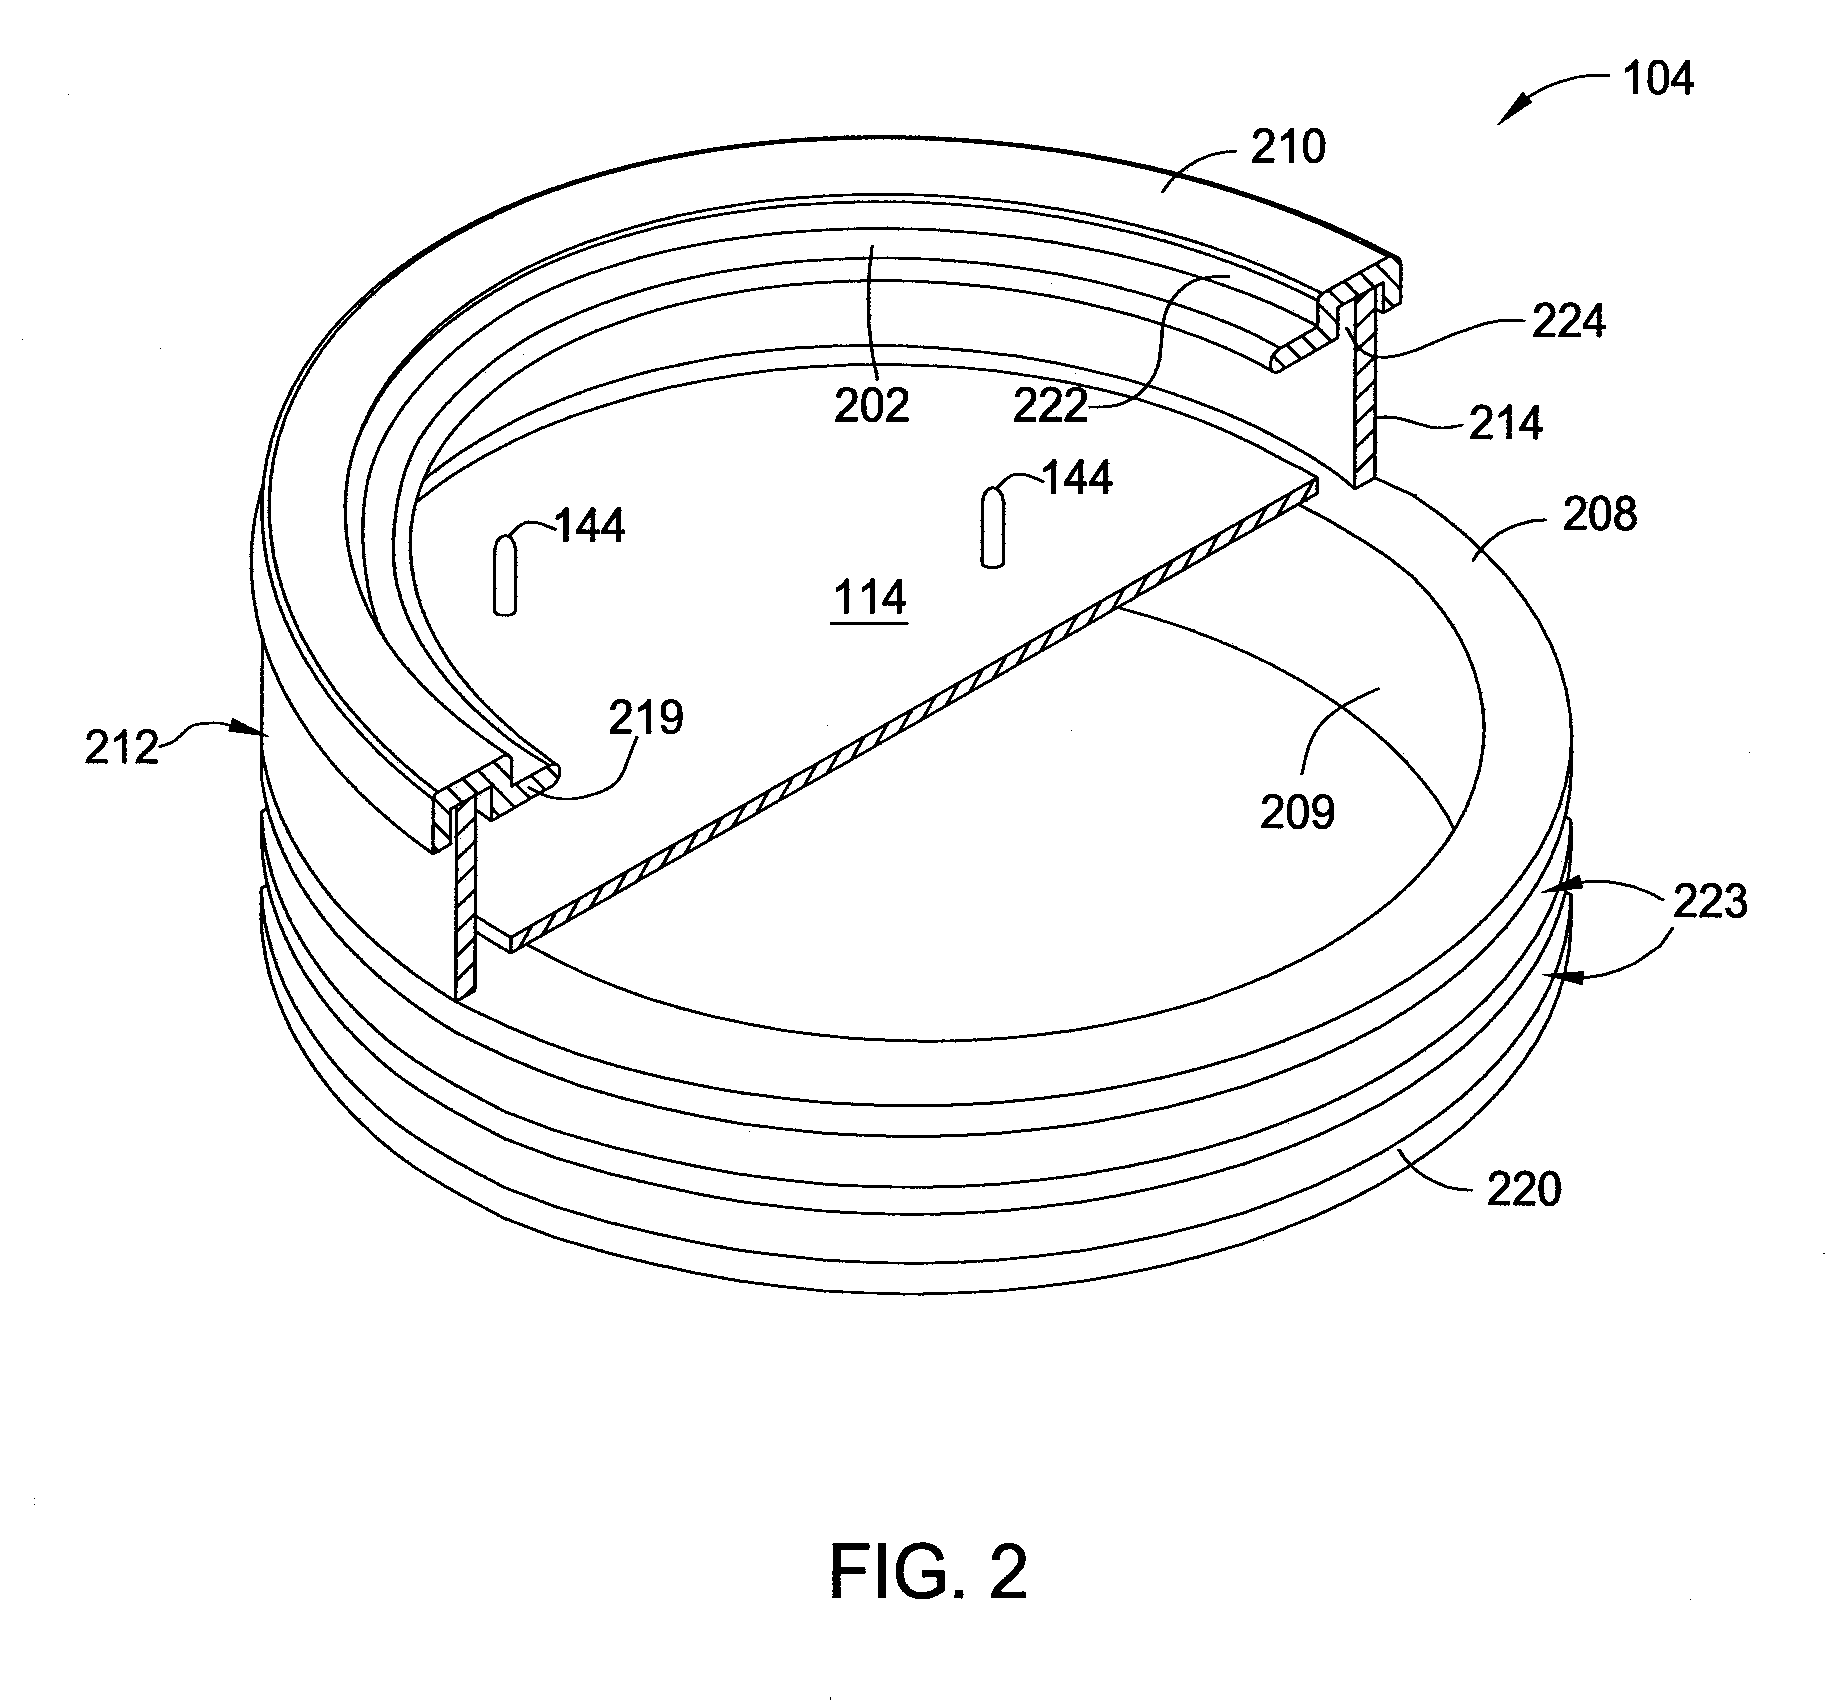 Rapid conductive cooling using a secondary process plane